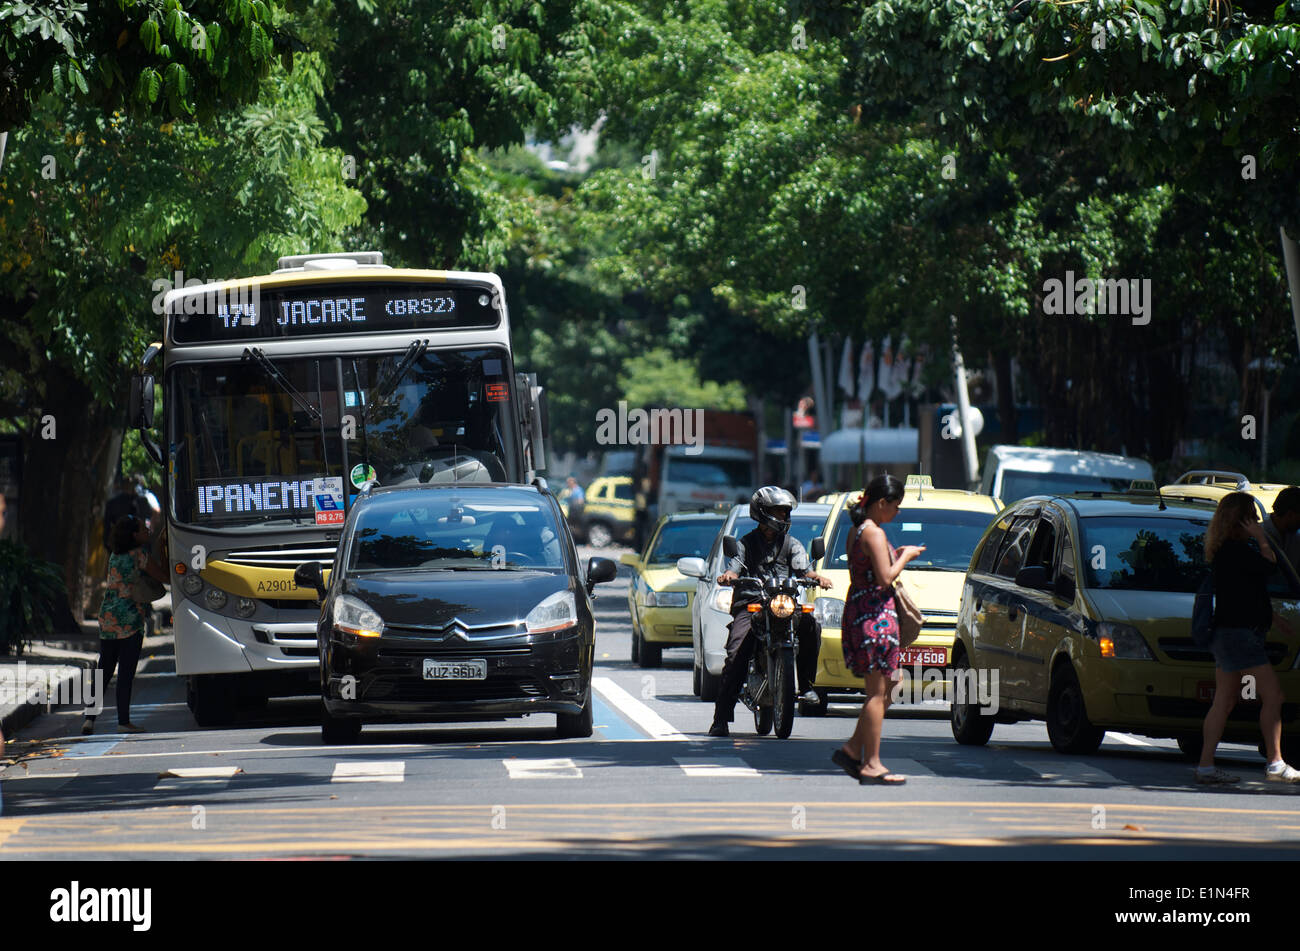 RIO DE JANEIRO, BRAZIL - CIRCA MARCH, 2013: Traffic stopped at an intersection in the leafy neighborhood of Ipanema. Stock Photo